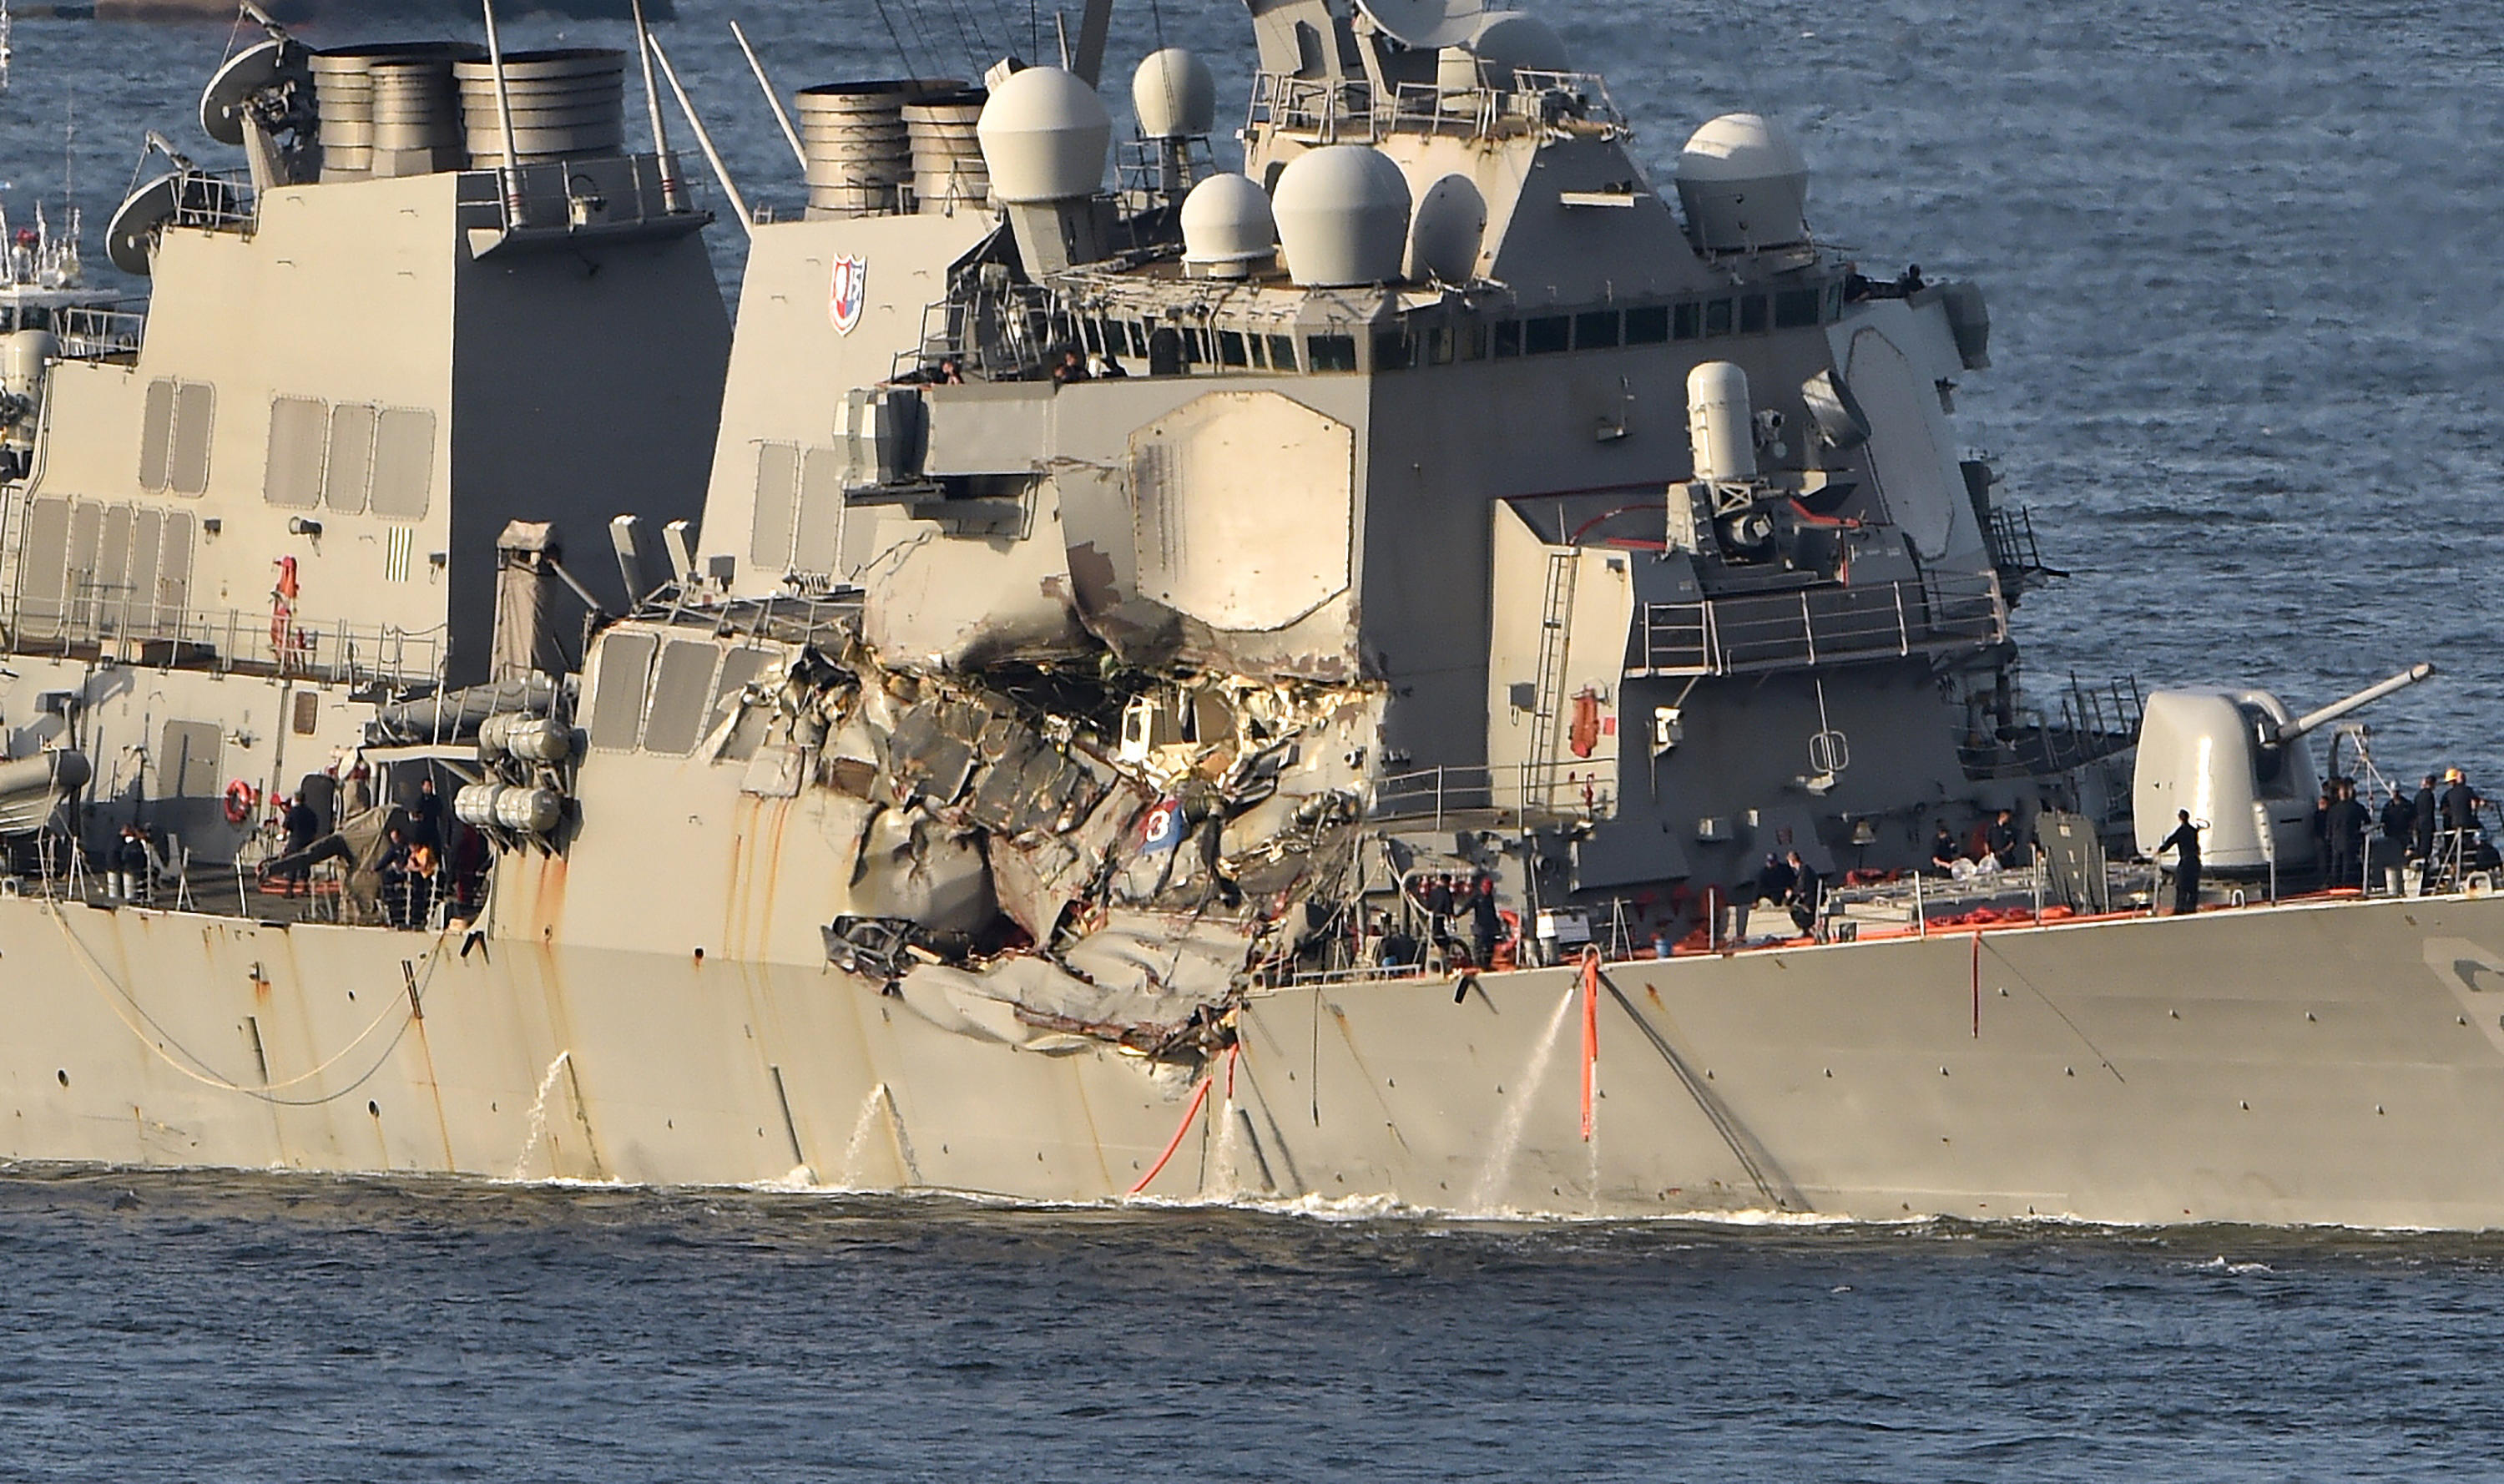 7 sailors missing from USS Fitzgerald after collision off Japanese coast - CBS News3000 x 1778